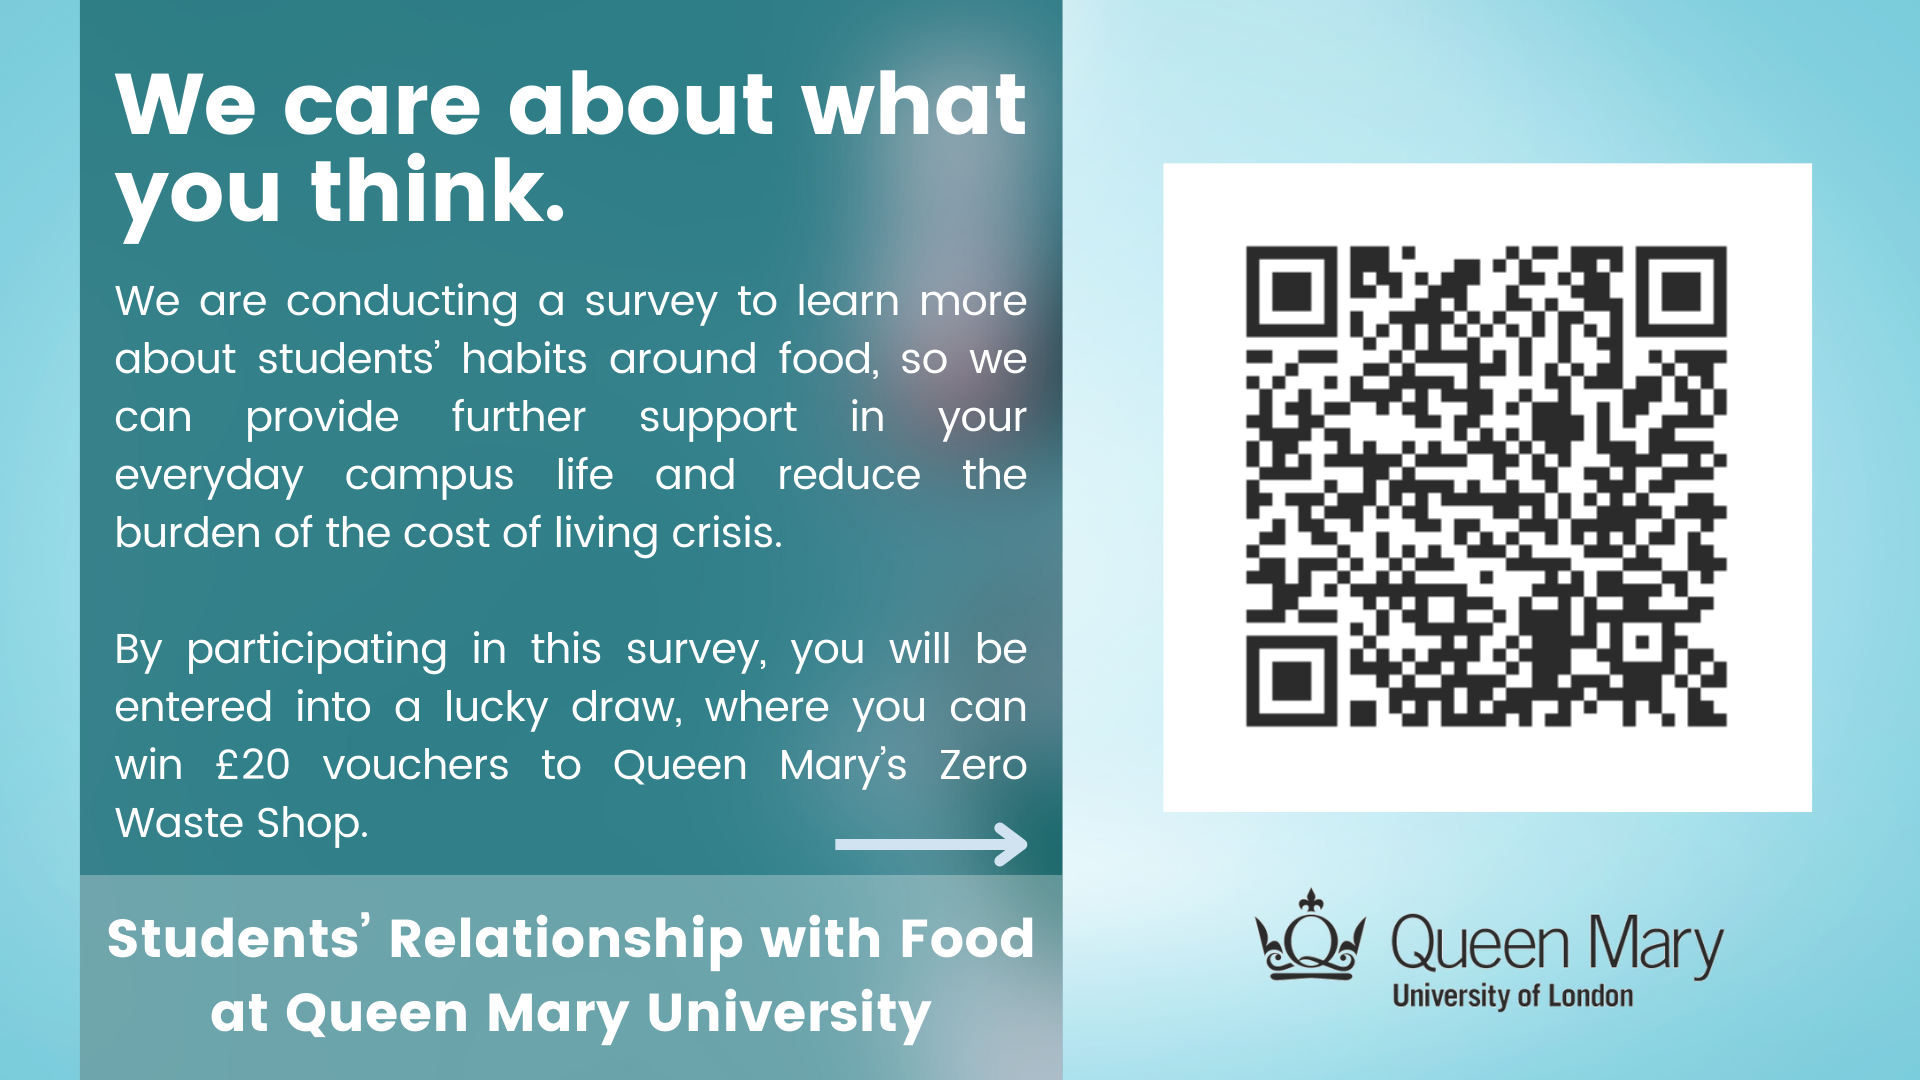 Students’ Relationship with Food at Queen Mary University survey link via QR code pictured